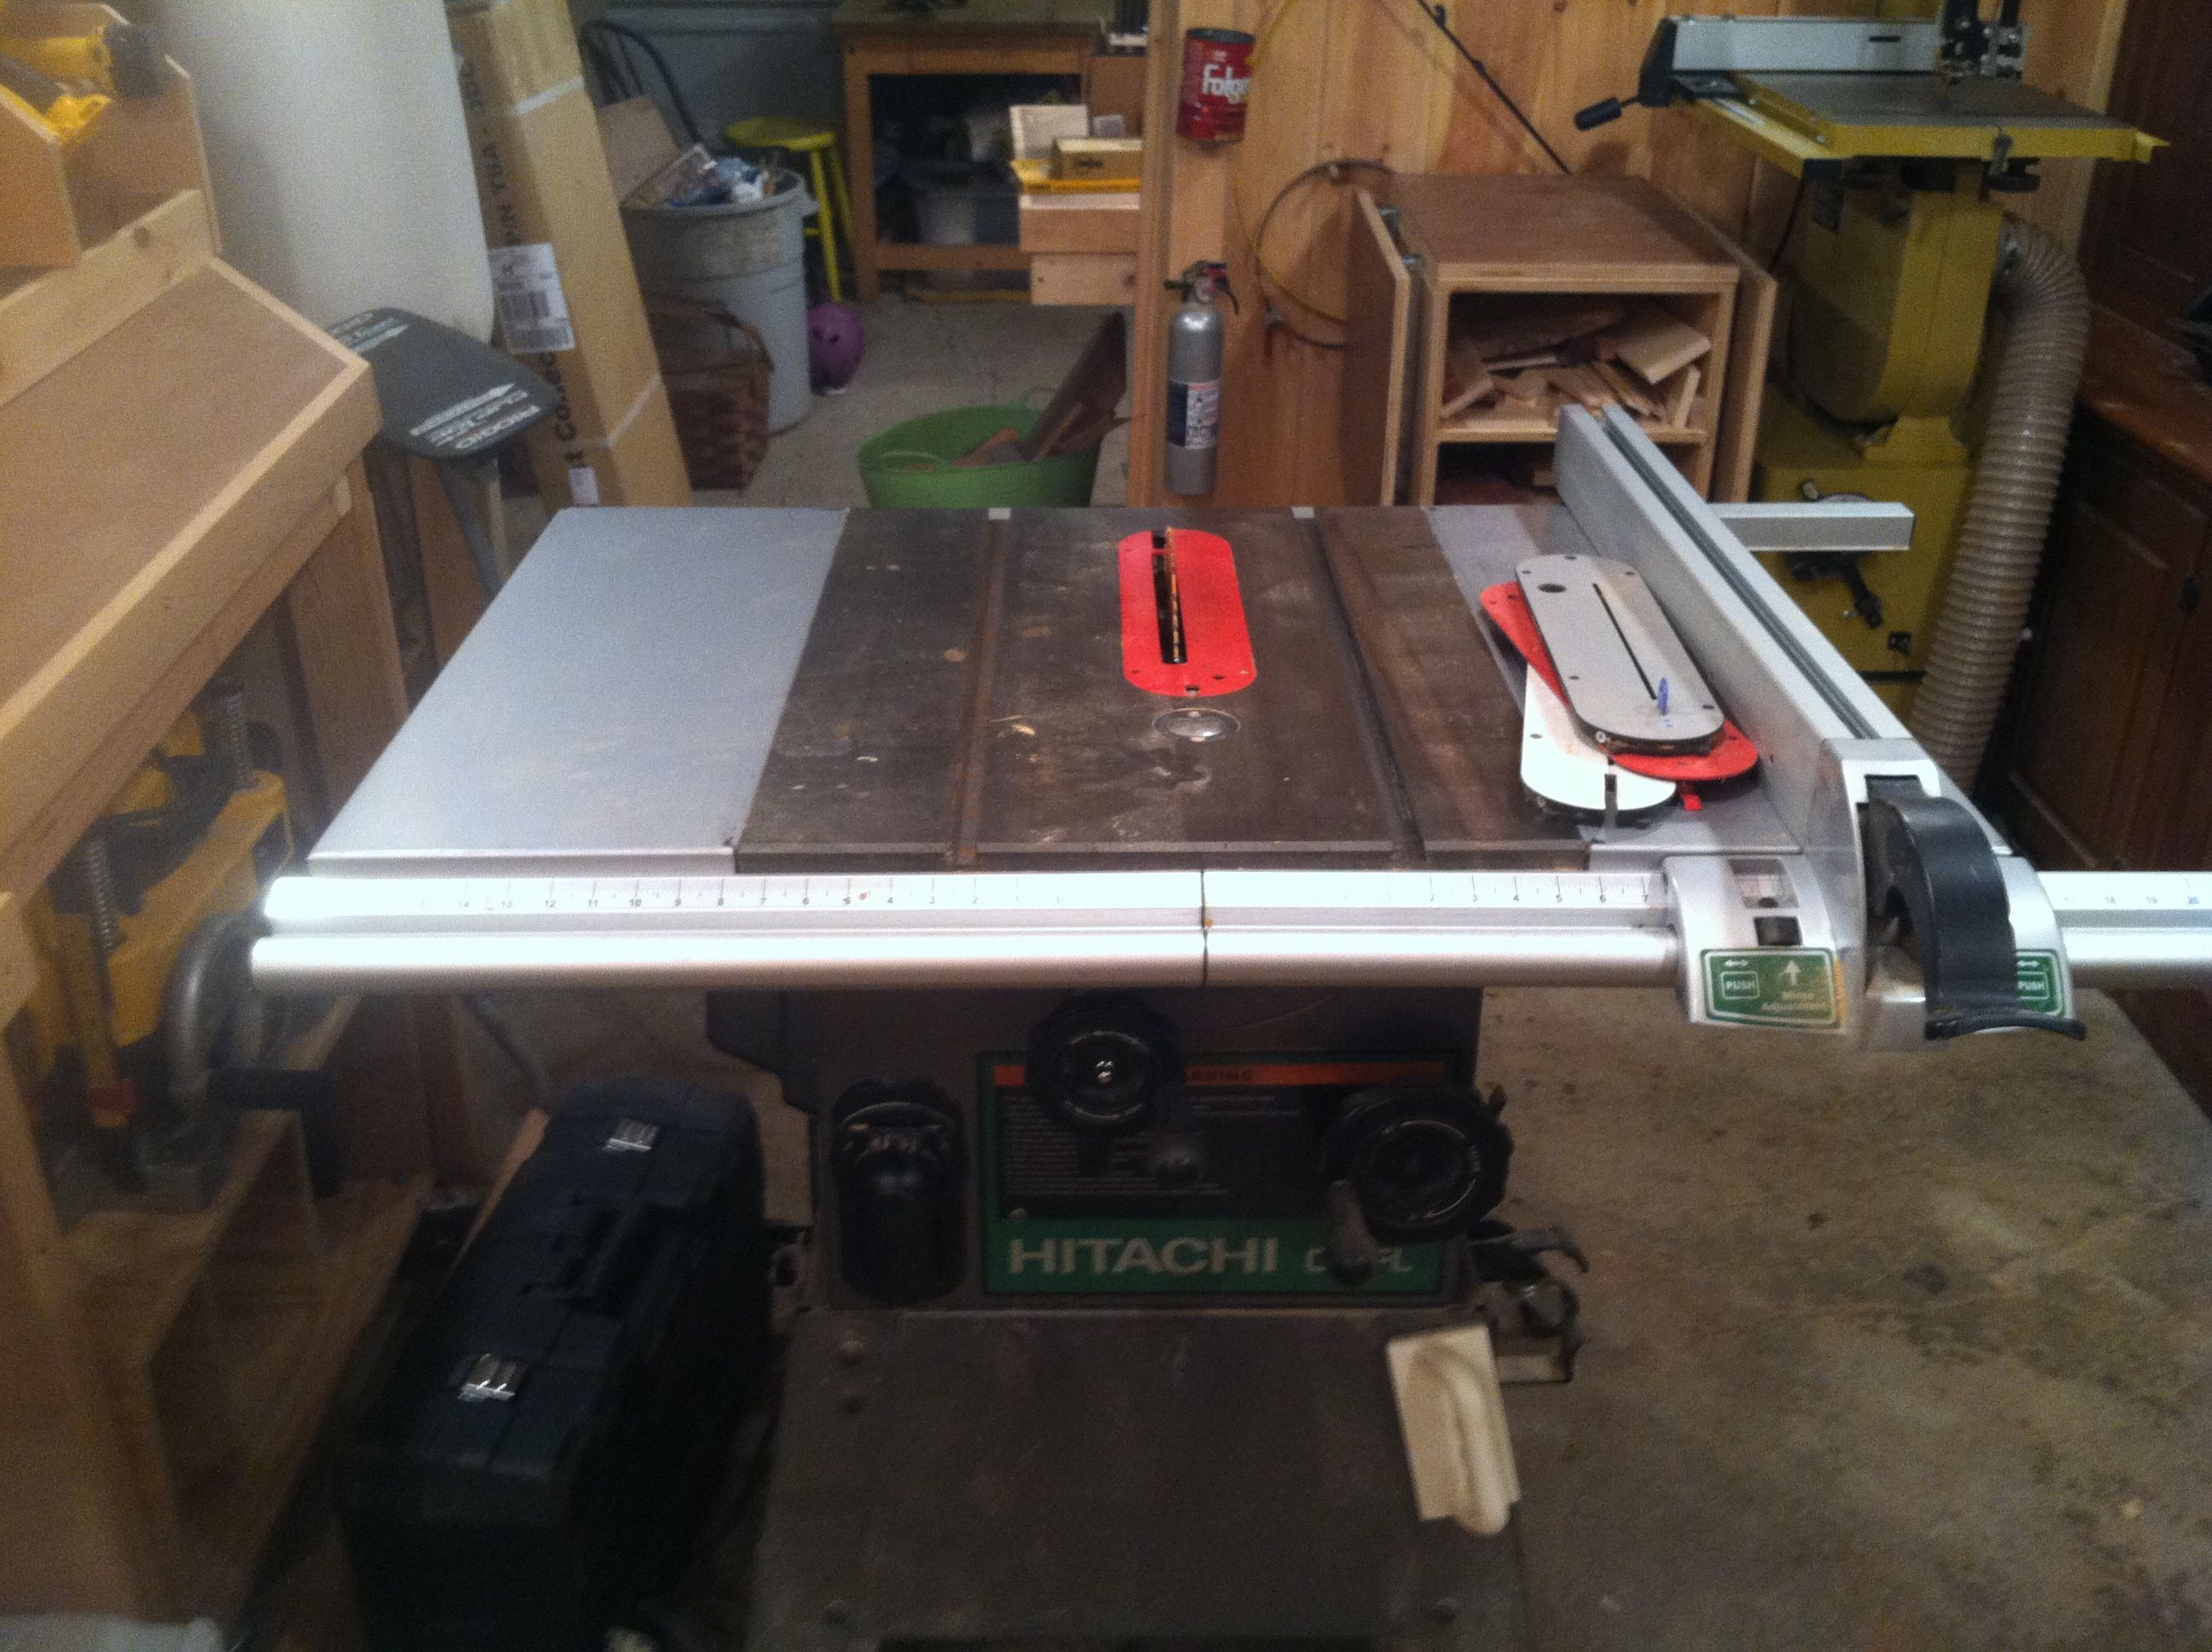 woodworking: -bye old friend! You were quite good to me as 